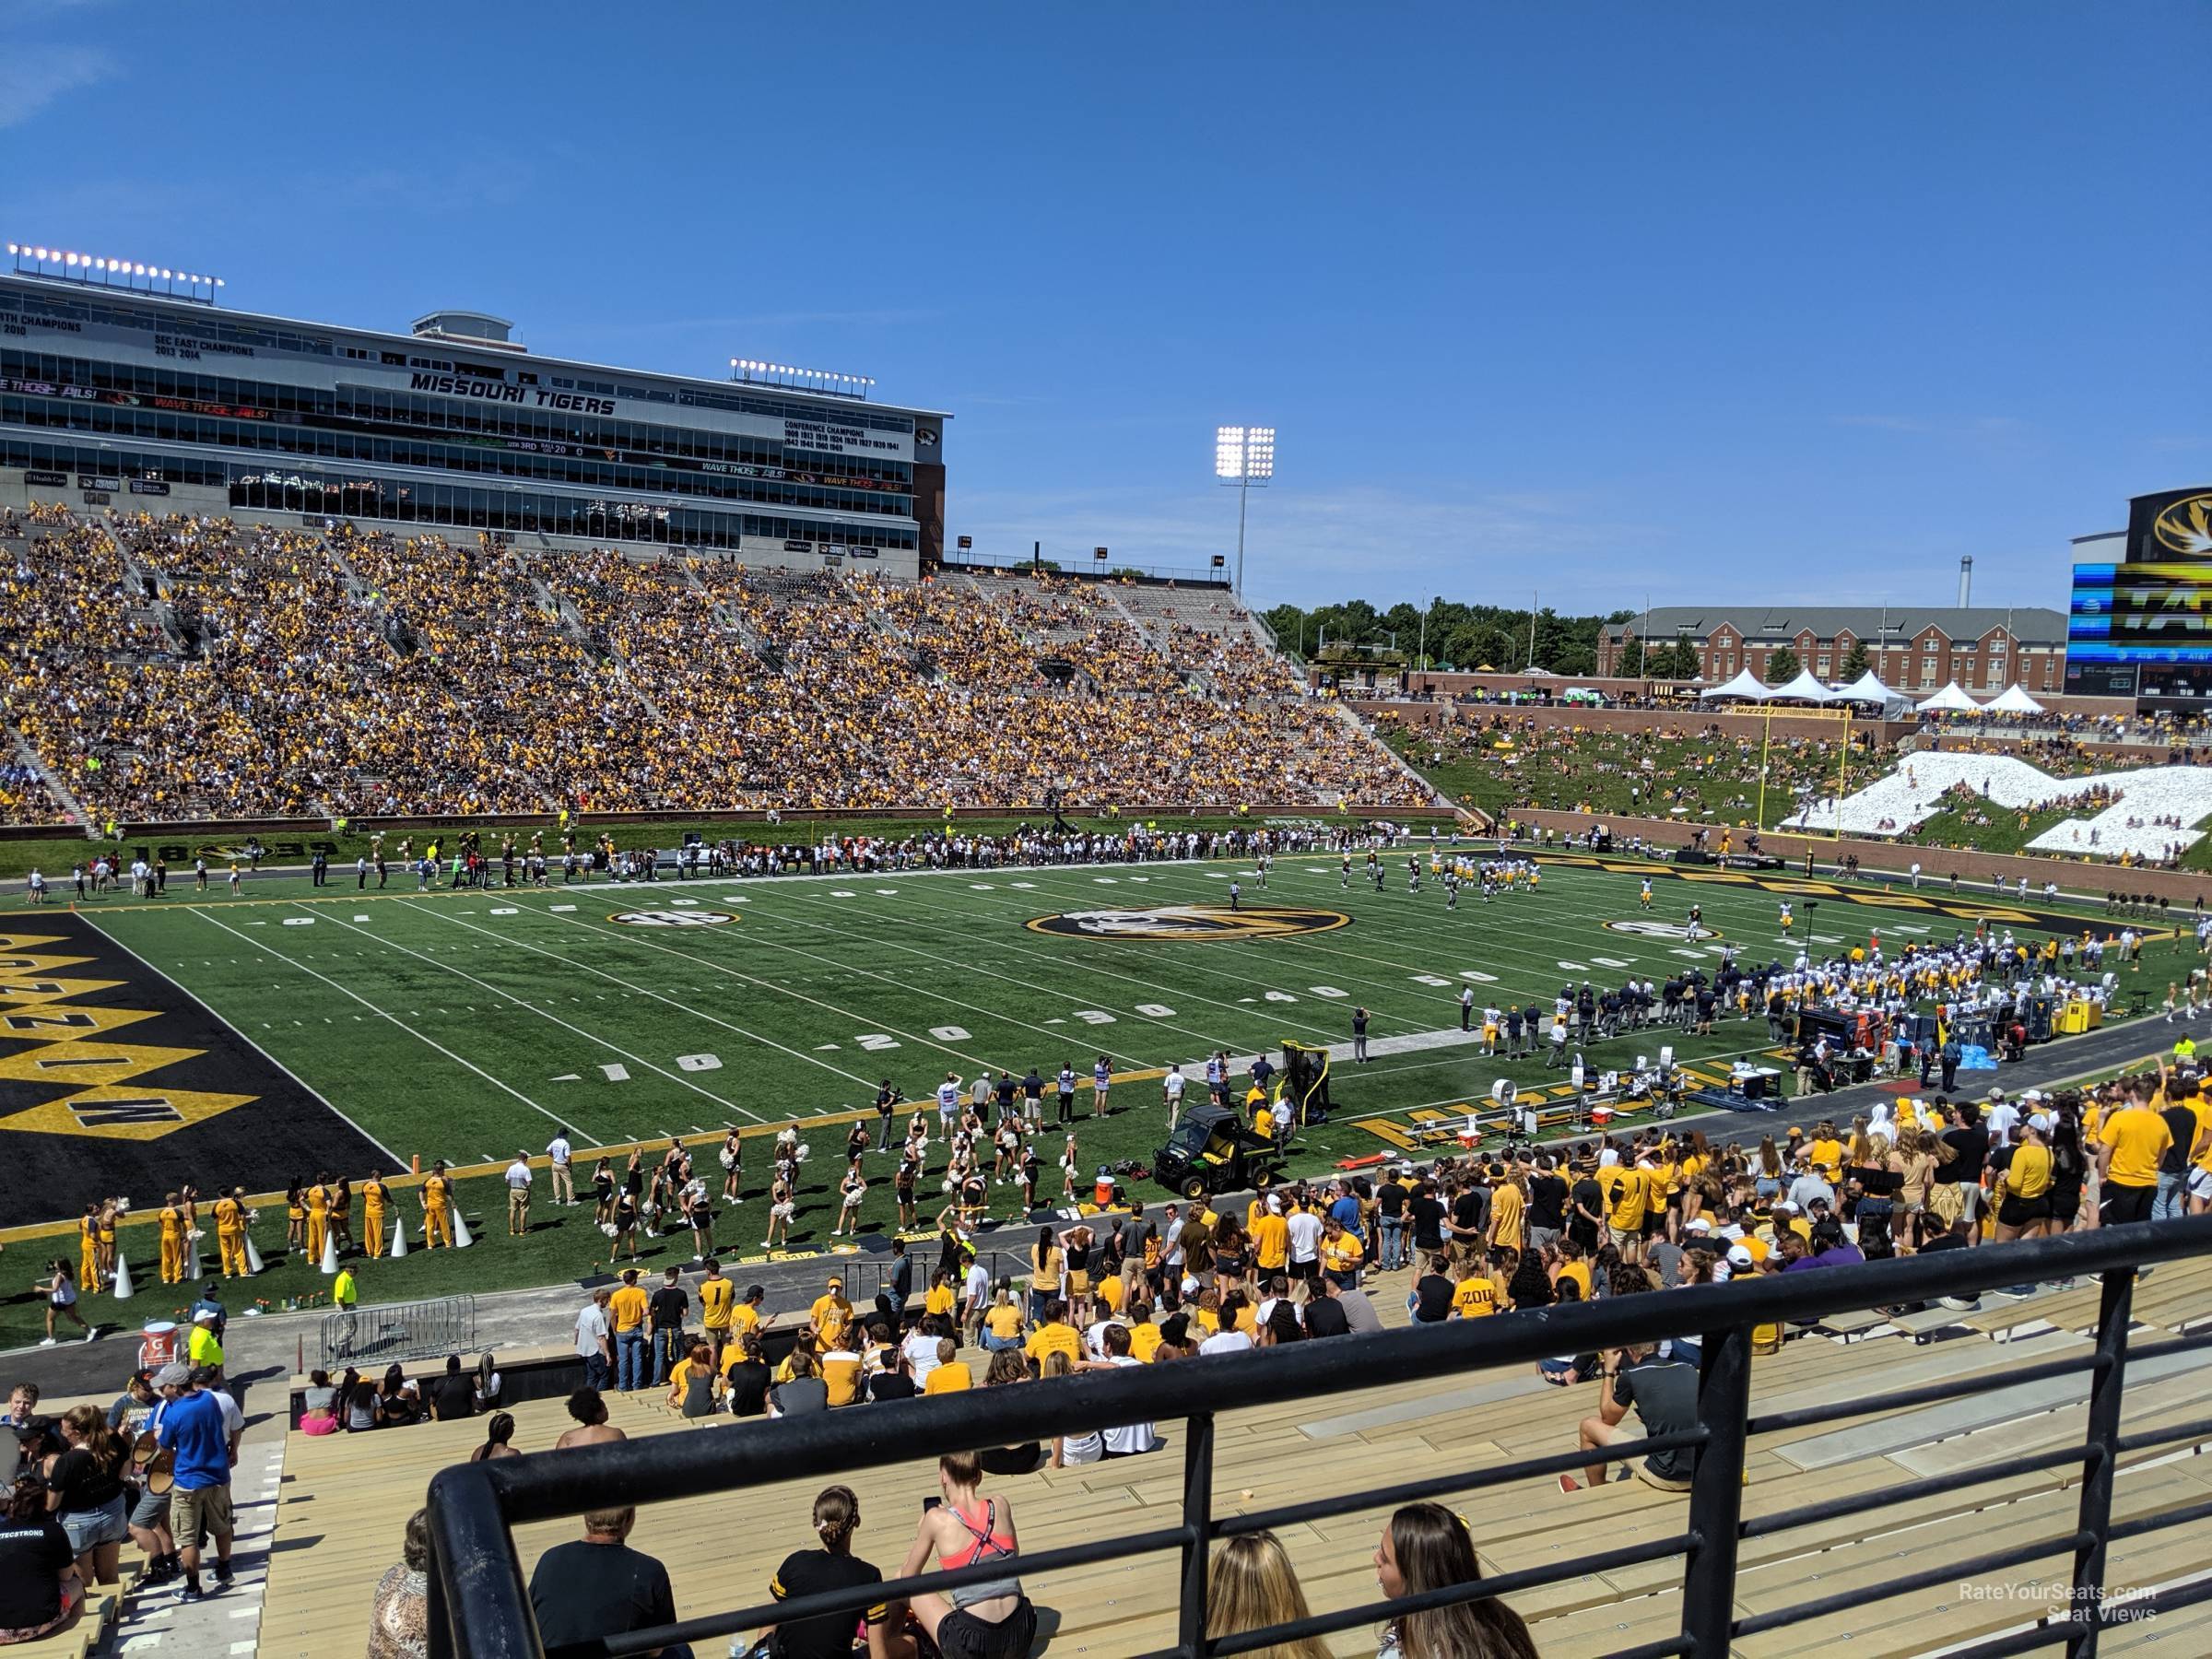 section 102, row 38 seat view  - faurot field